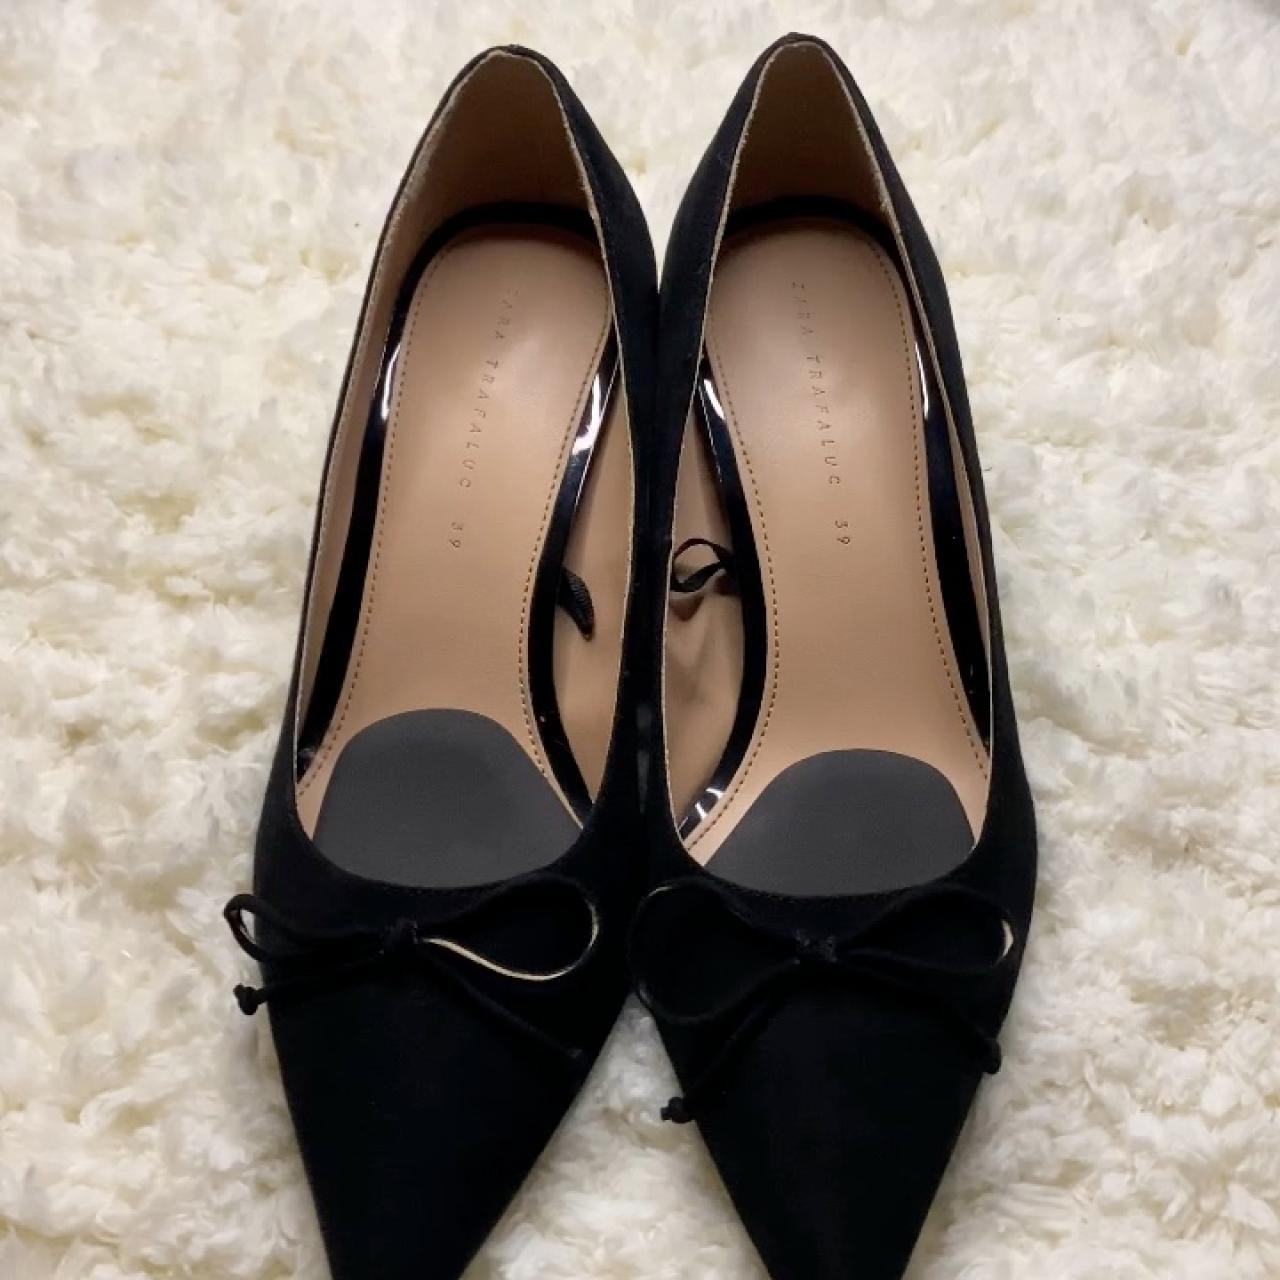 These Zara Trafaluc heels are great for a night out... - Depop